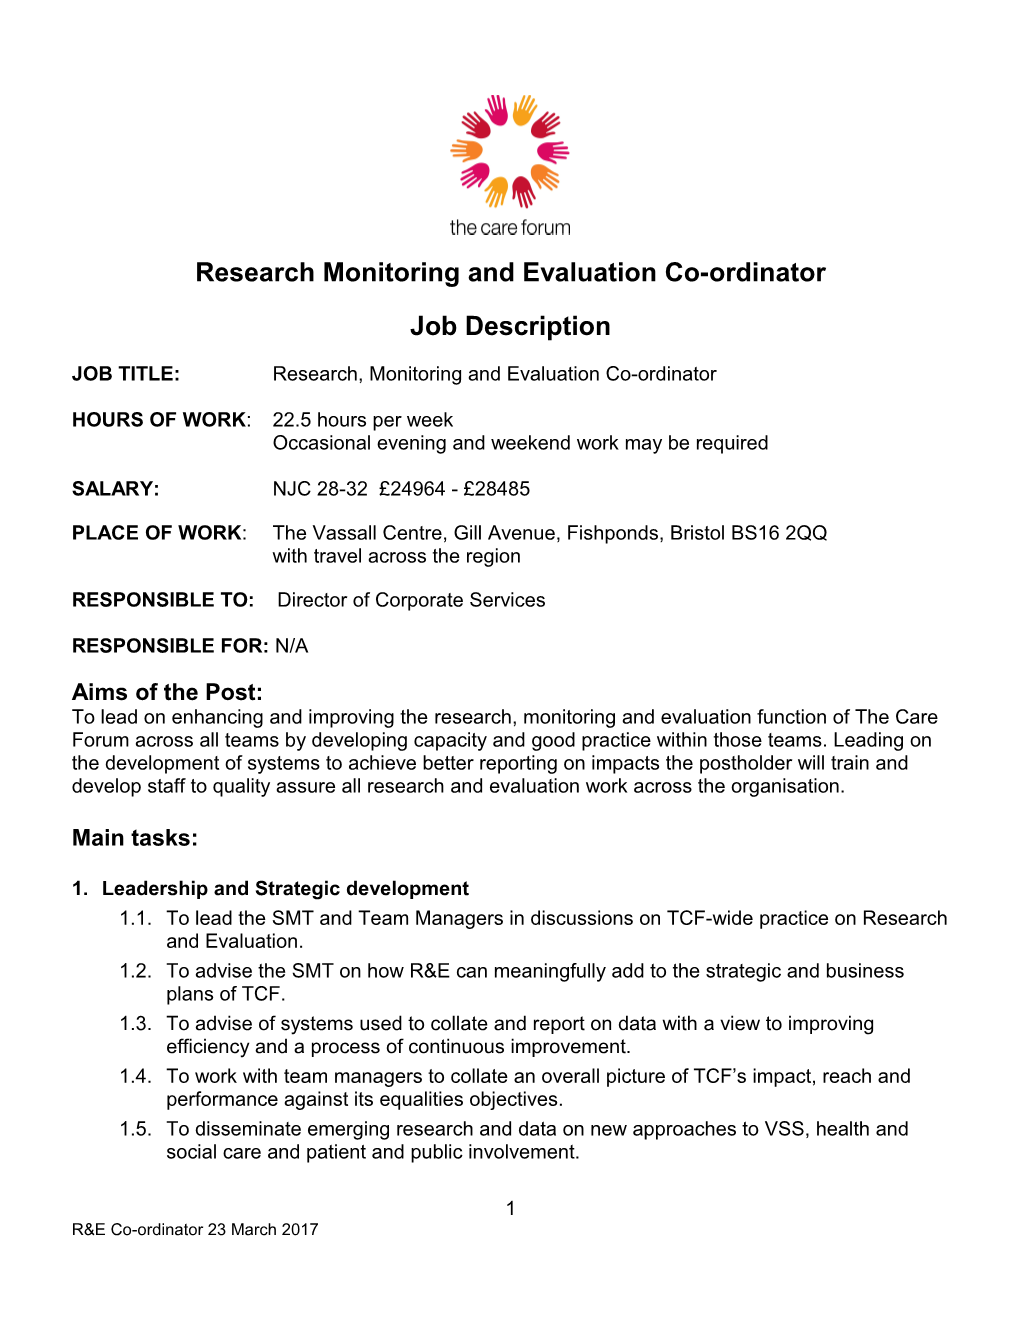 Research Monitoring and Evaluationco-Ordinator